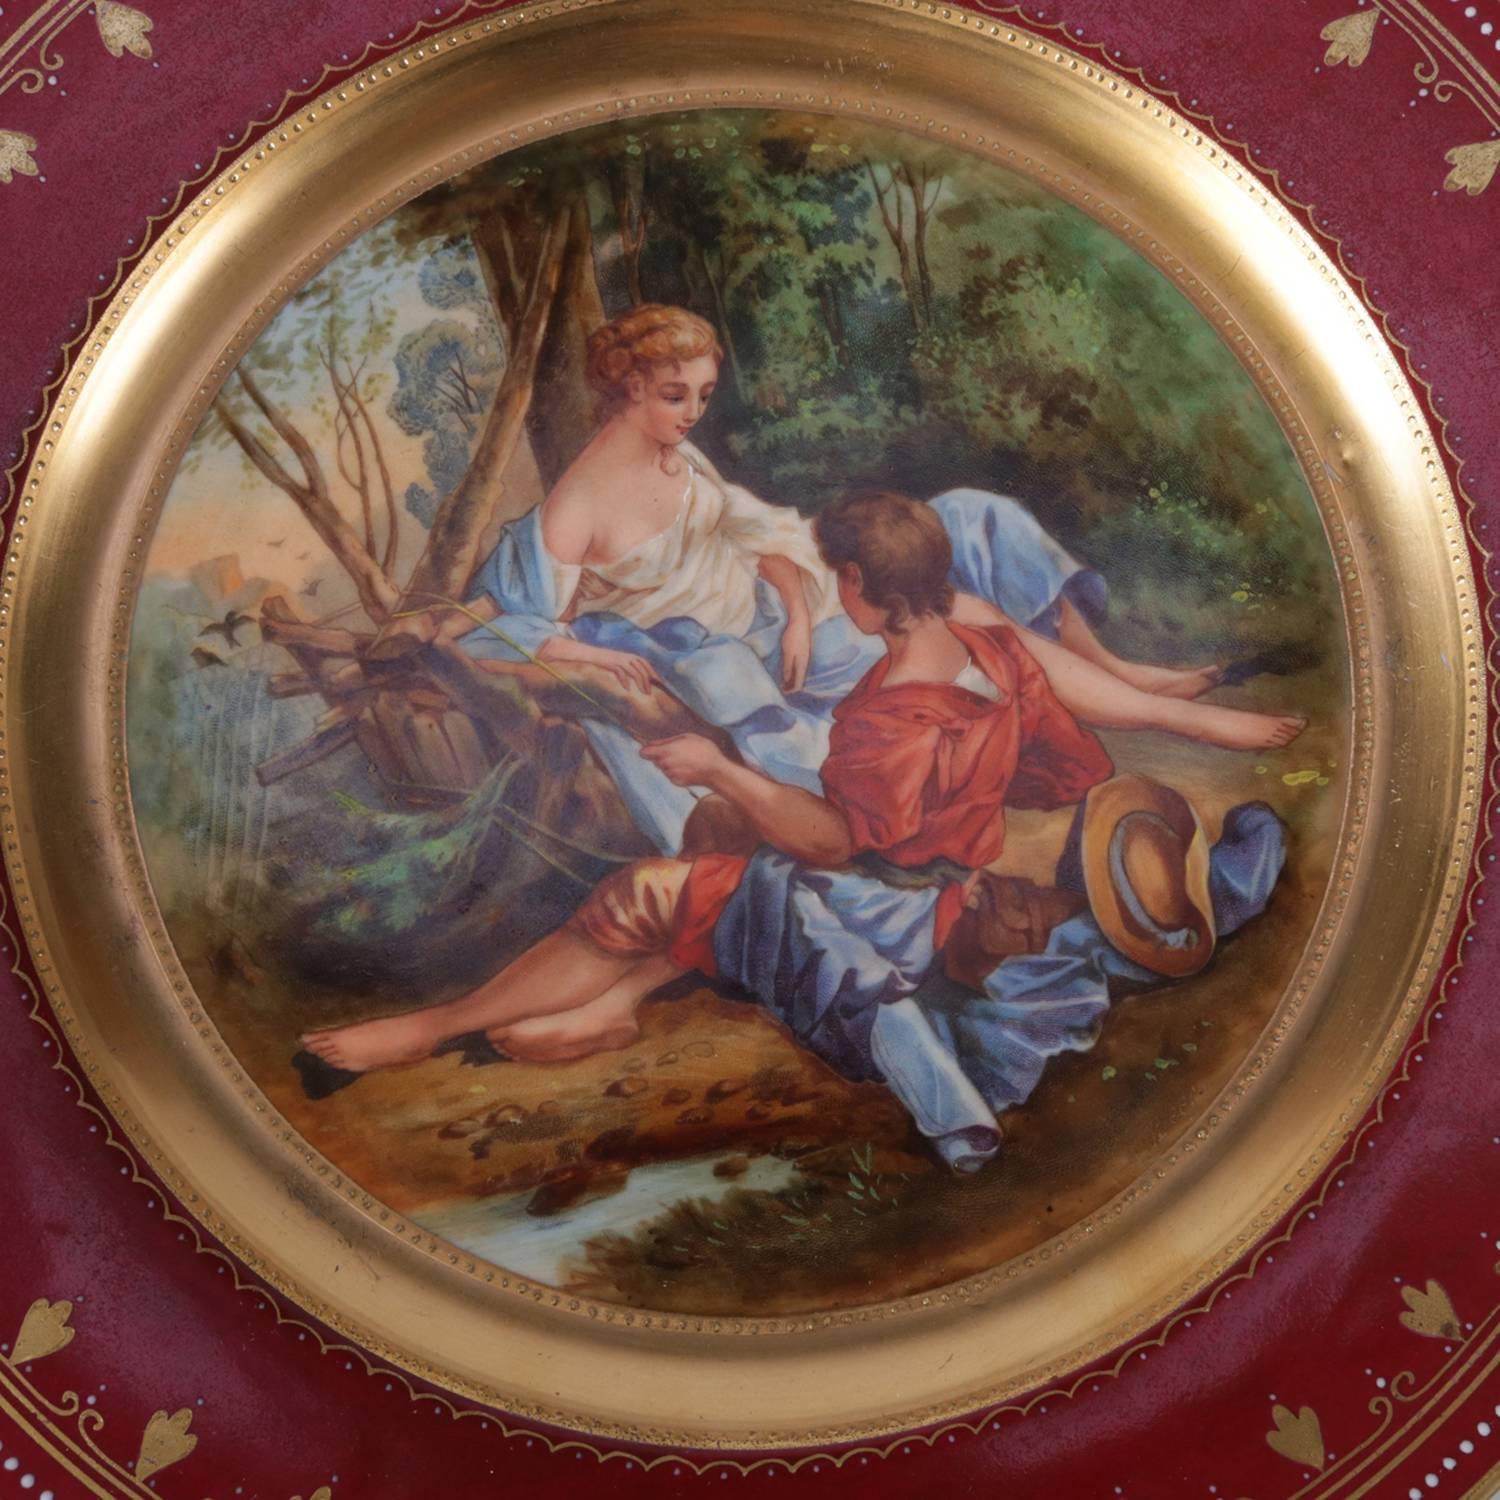 Austrian Vienna pictorial hand-painted and gilt decorated porcelain genre plate 